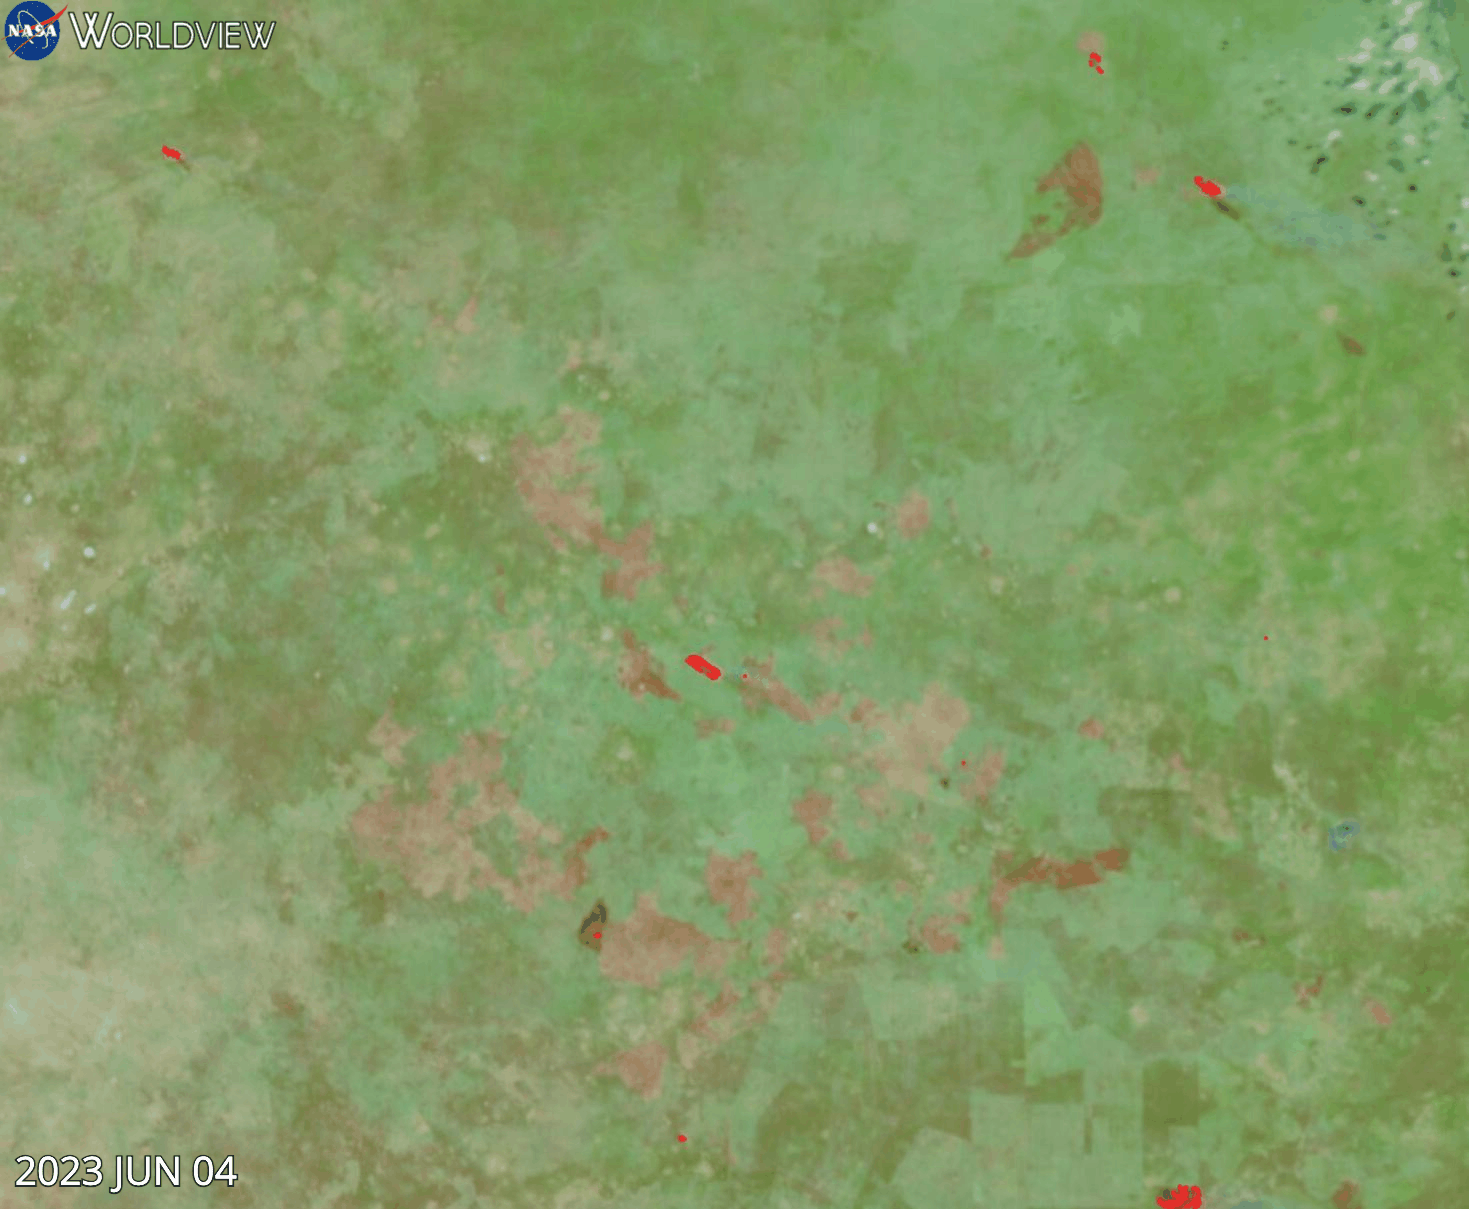 False-color animation of fires and burn scars in Botswana for 4 - 14 June 2023 from the VIIRS instrument aboard the Suomi NPP satellite